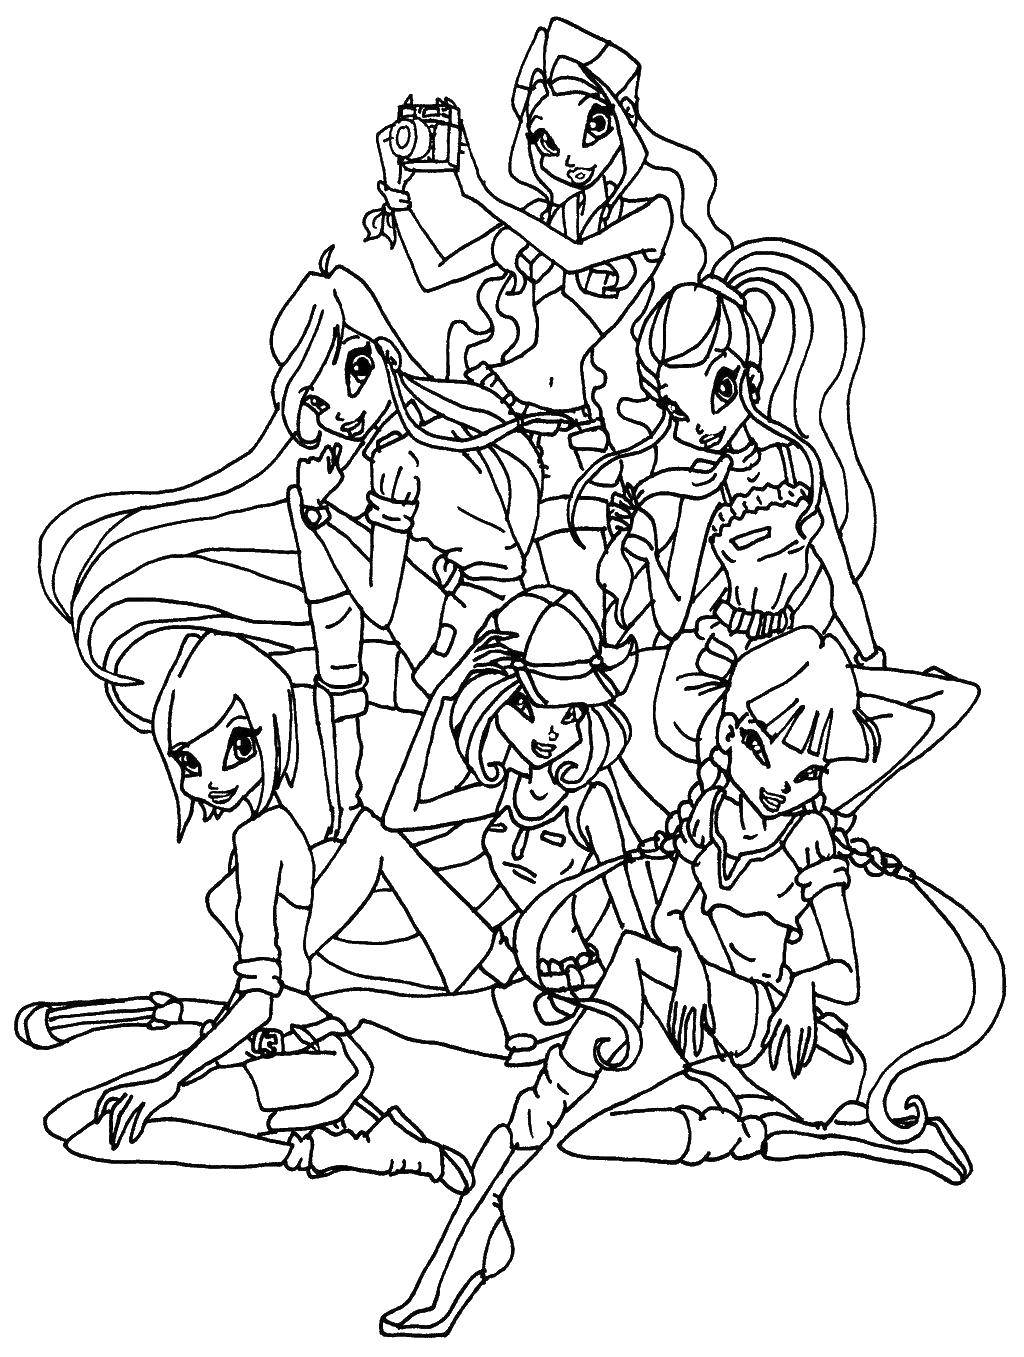 Coloring A team of fairies. Category Winx club. Tags:  Character cartoon, Winx.